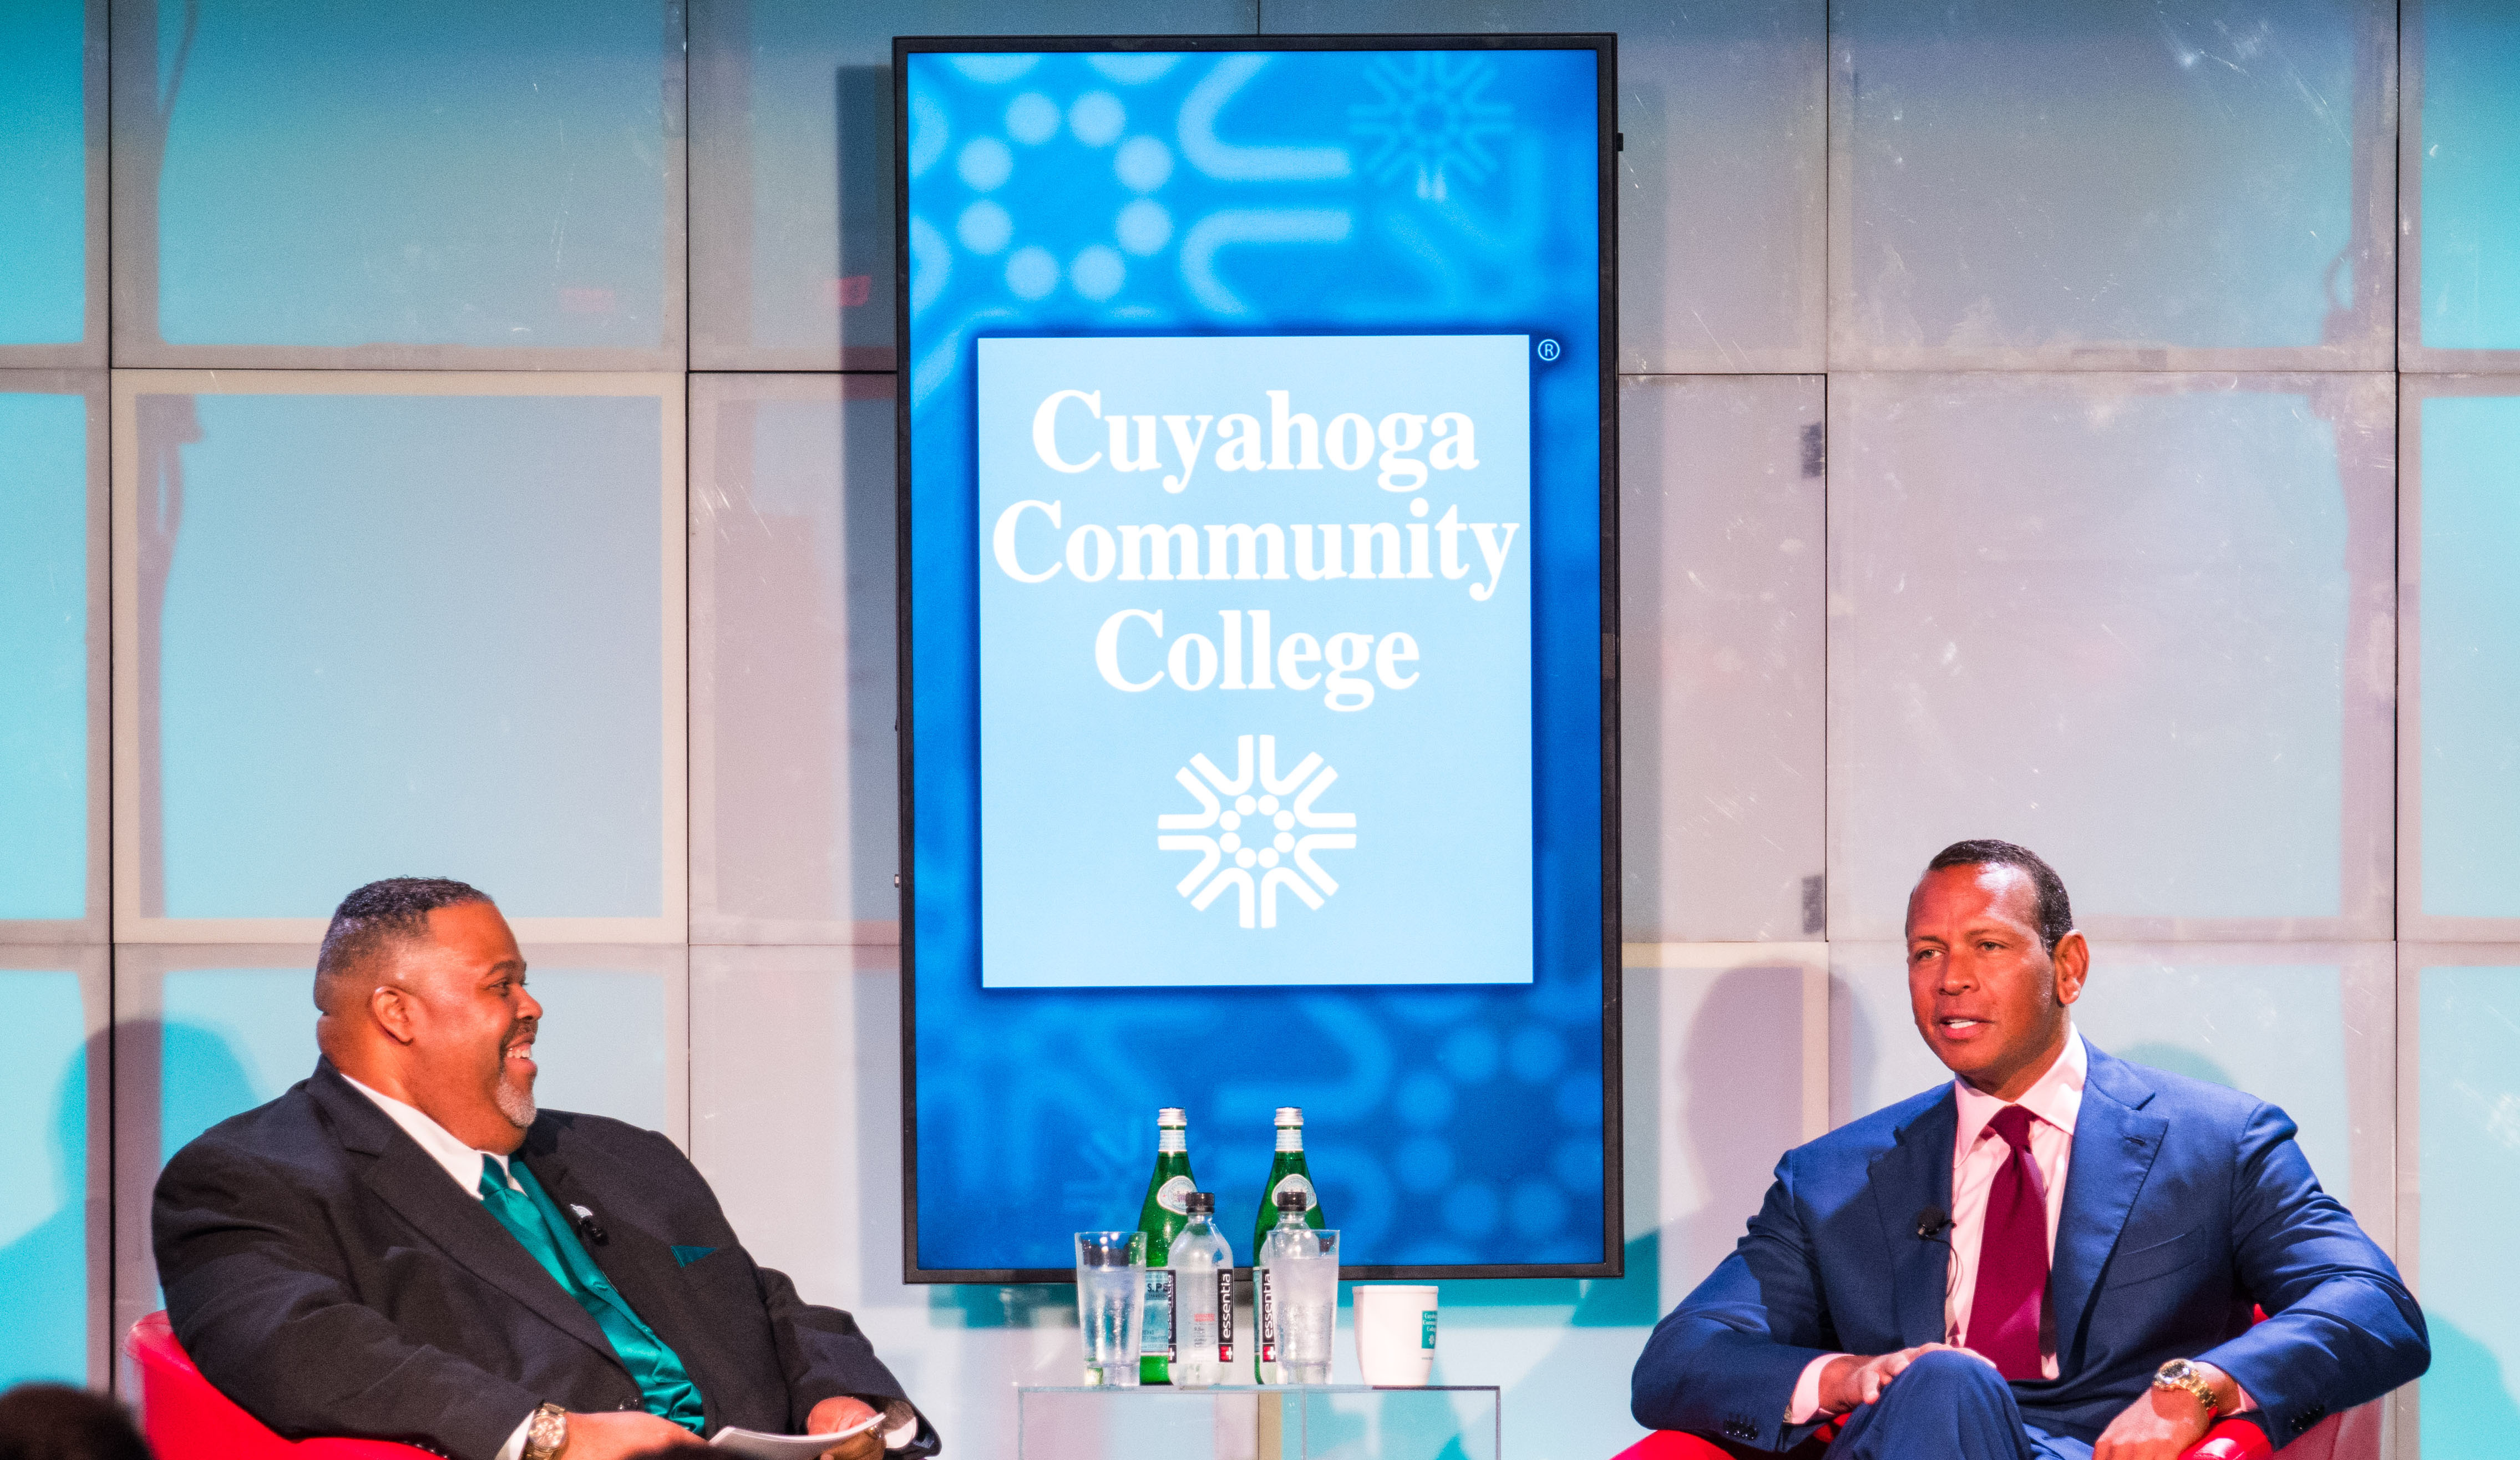 Tri-C President Dr. Michael Baston in conversation with Alex Rodriquez. Seated on stage in red club chairs under the Cuyahoga Community College logo and signage 